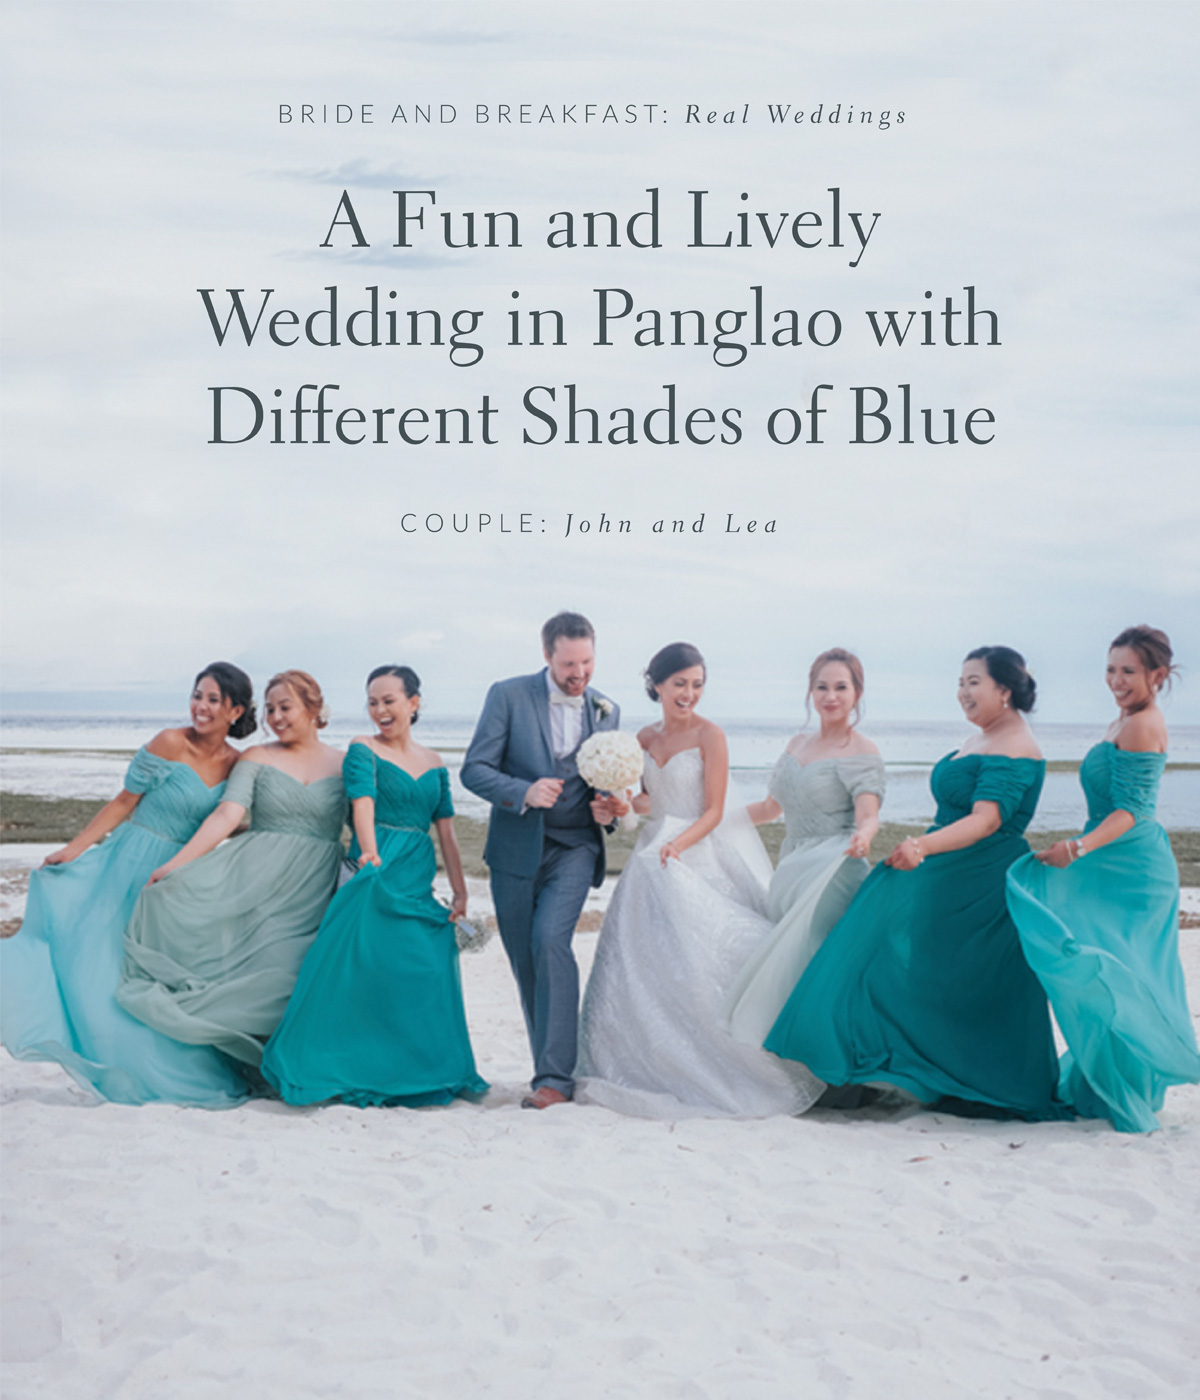 A Fun and Lively Wedding in Panglao with Different Shades of Blue